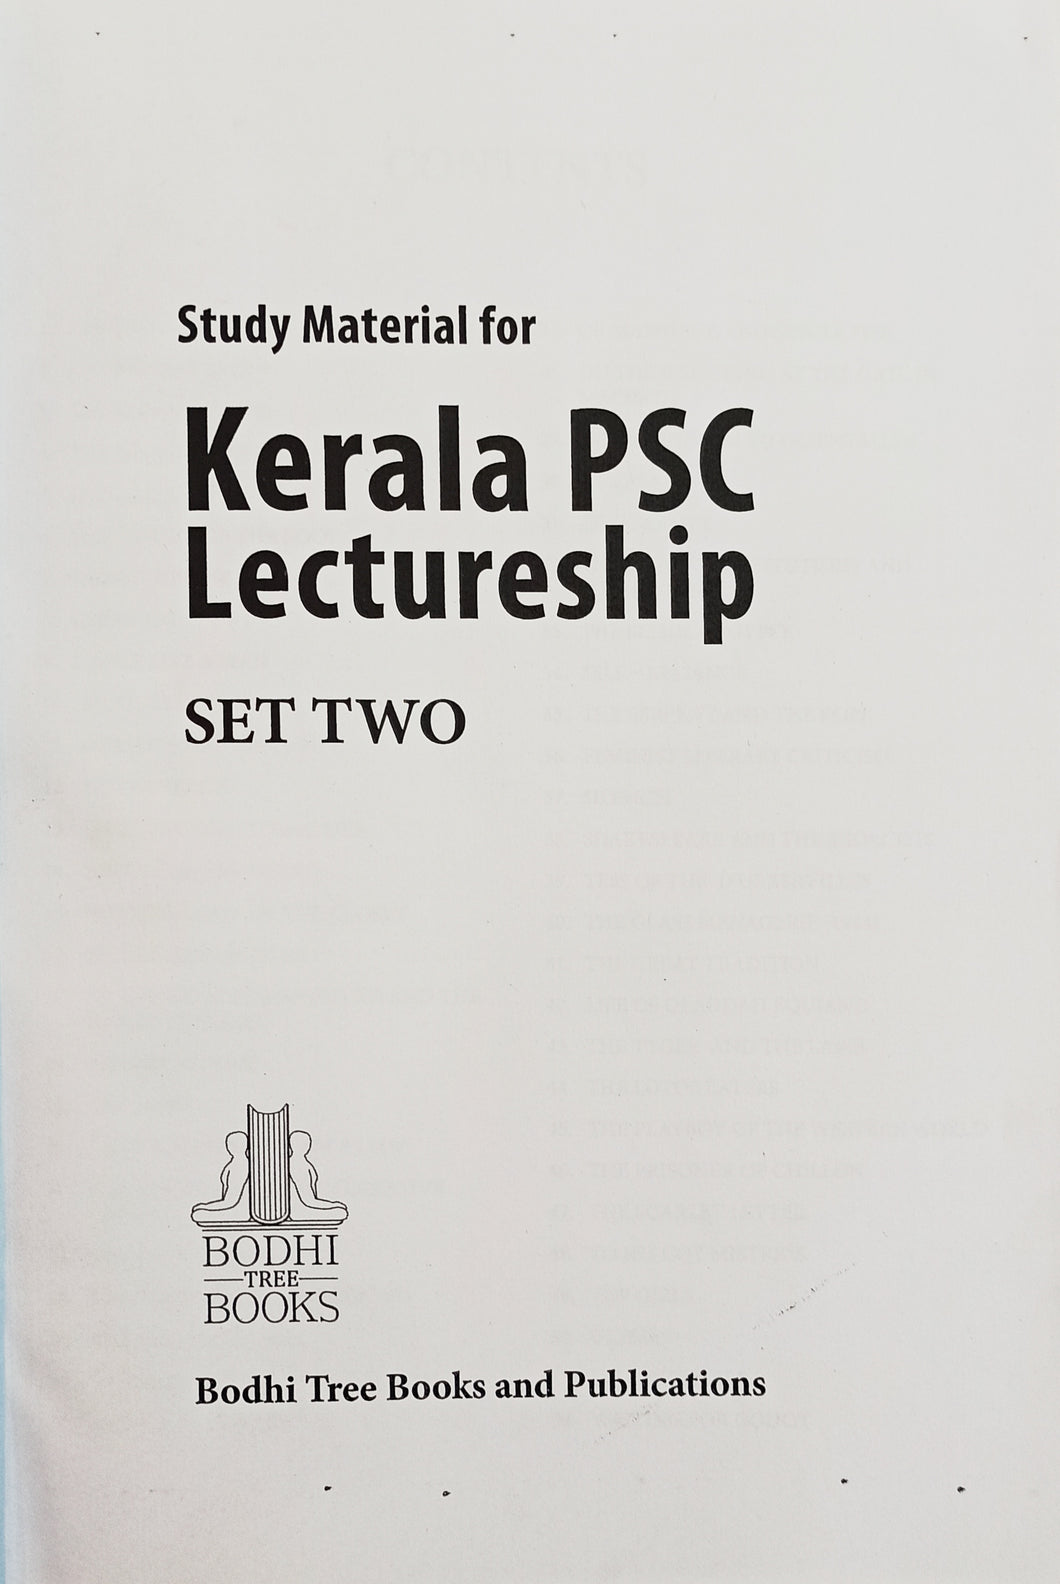 Study Material for Kerala PSC Lectureship SET TWO